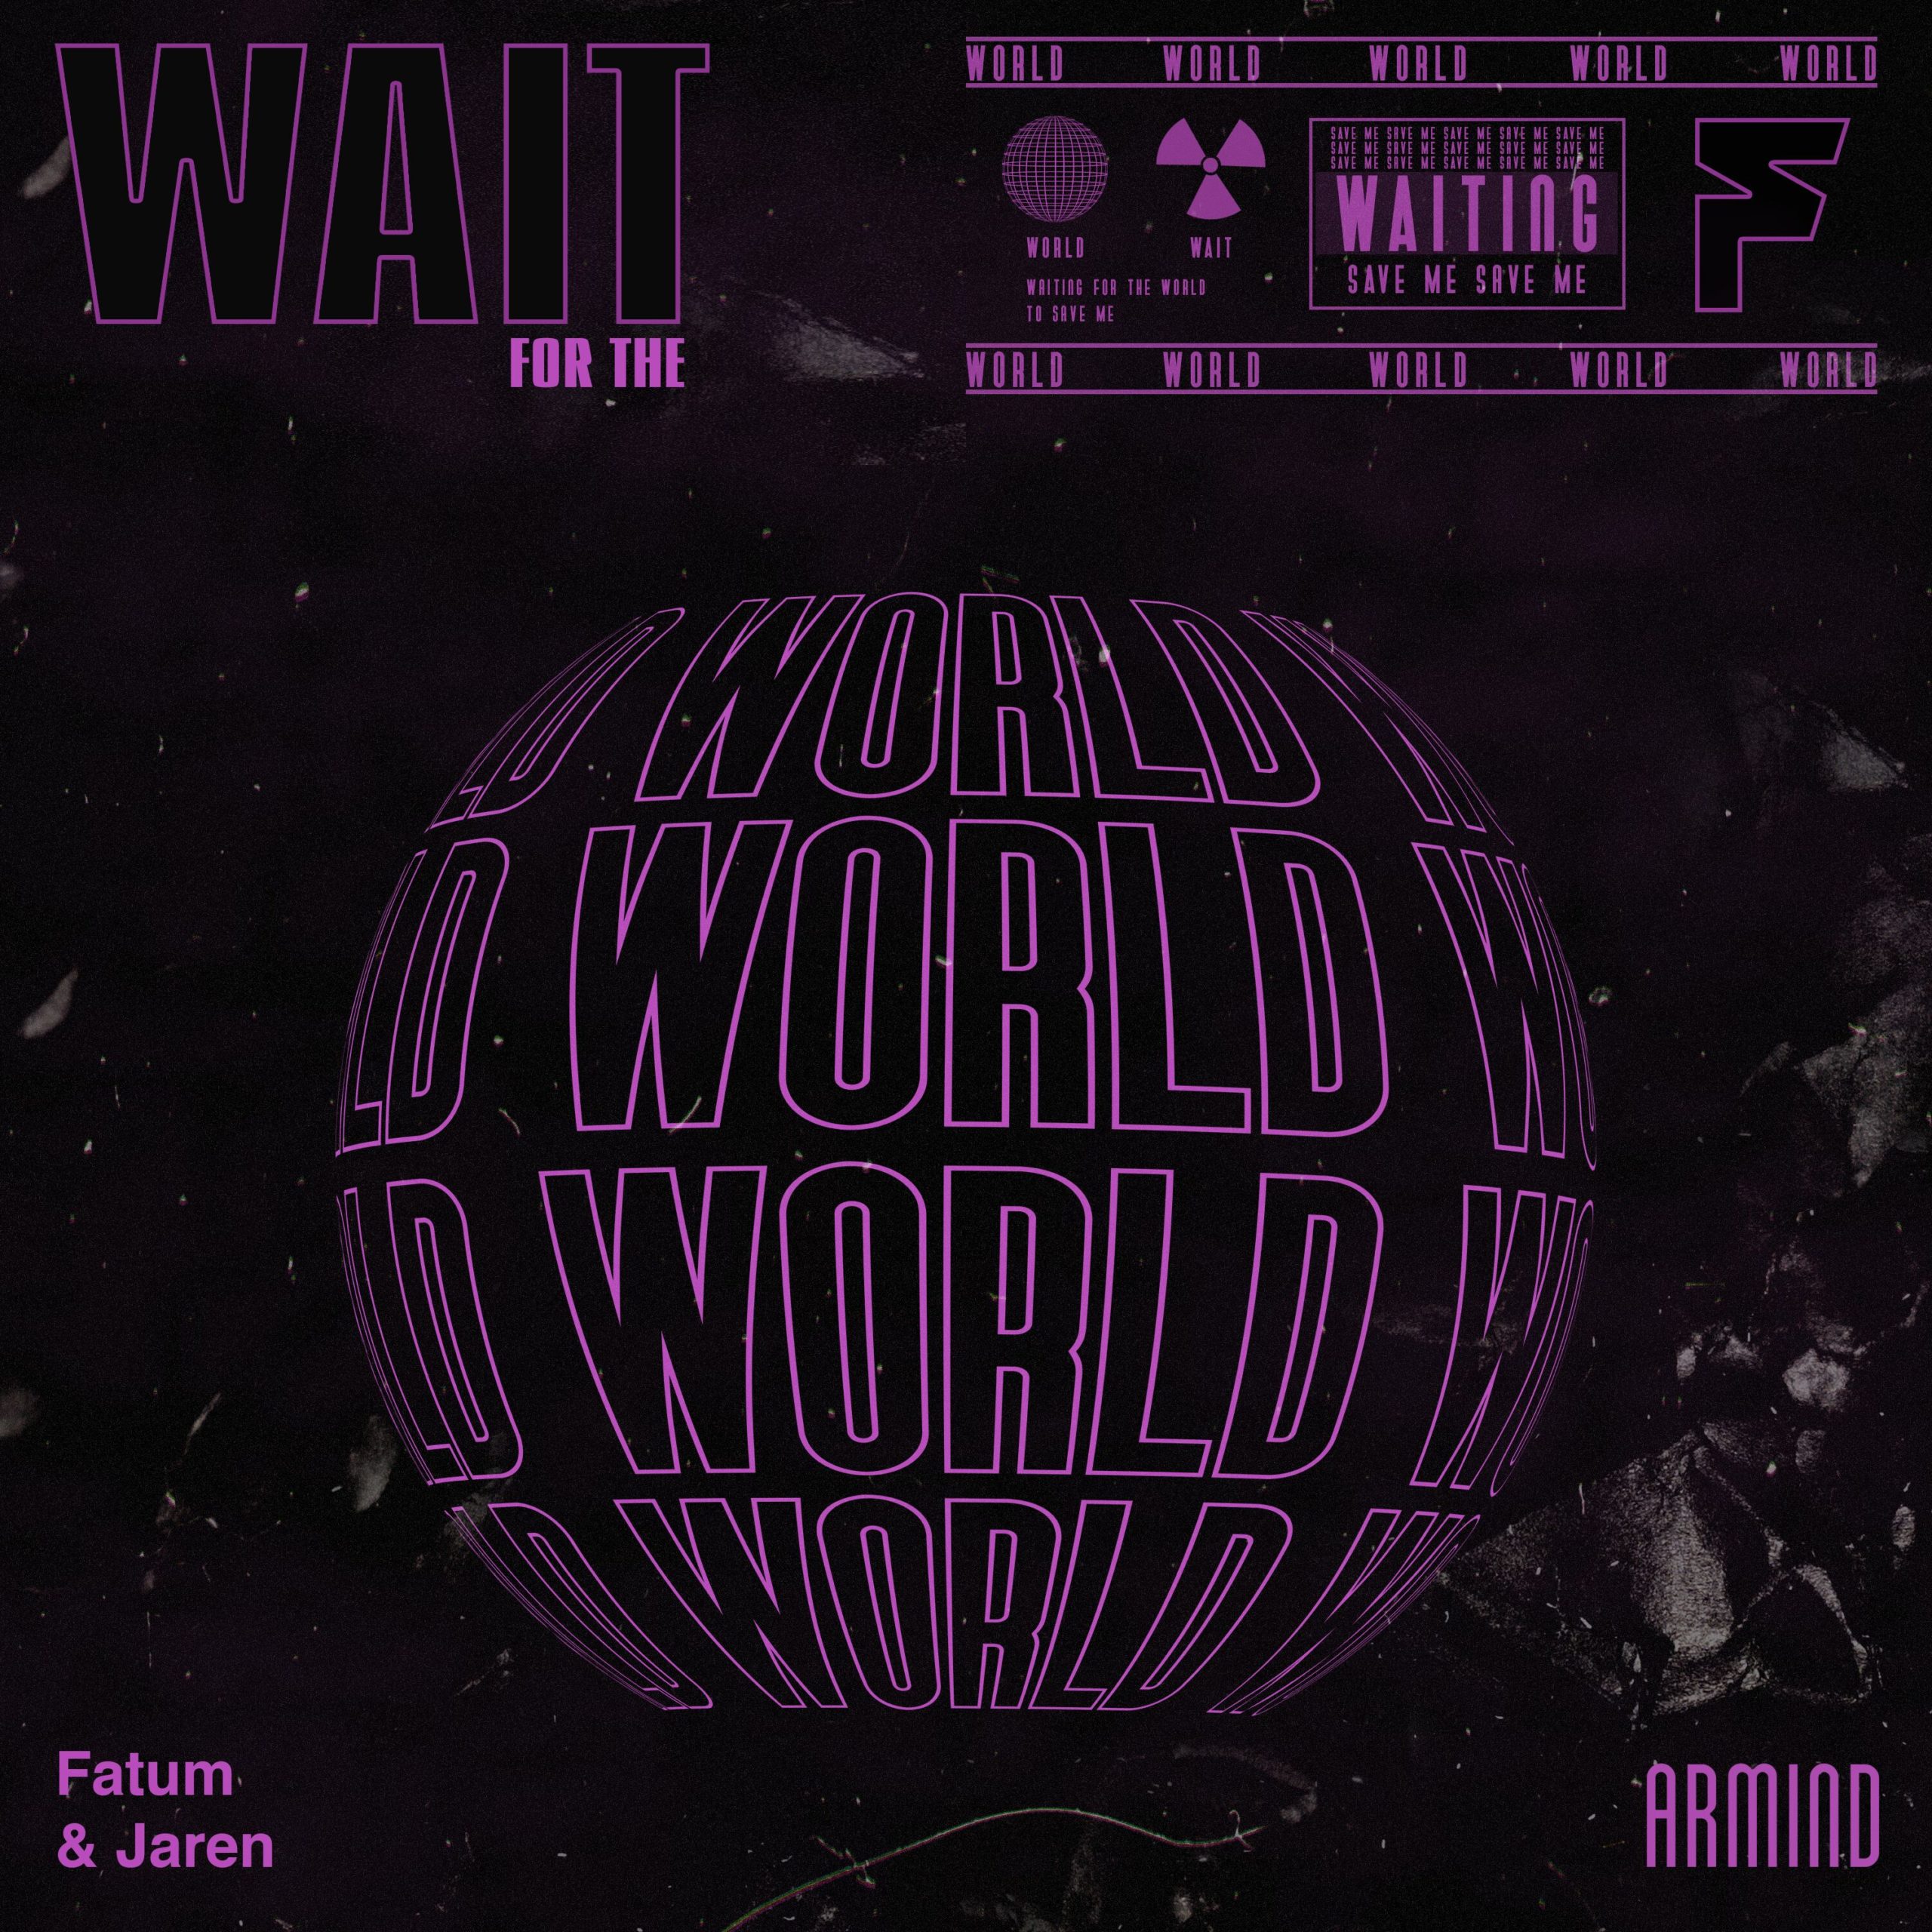 Fatum and Jaren presents Wait For The World on Armind